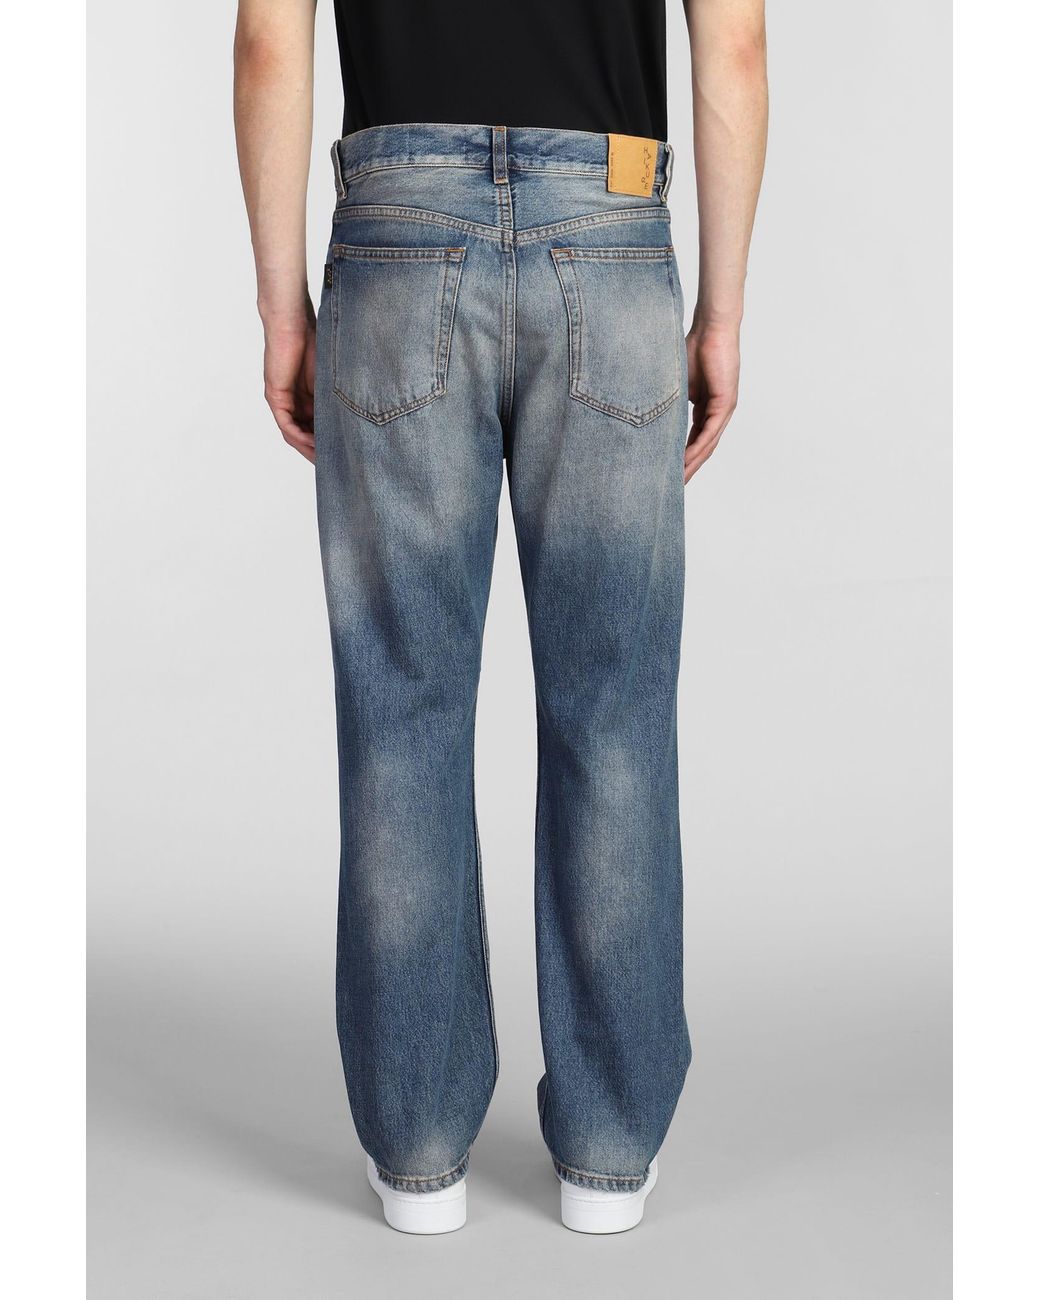 Haikure Louise Jeans In Blue Cotton for Men | Lyst